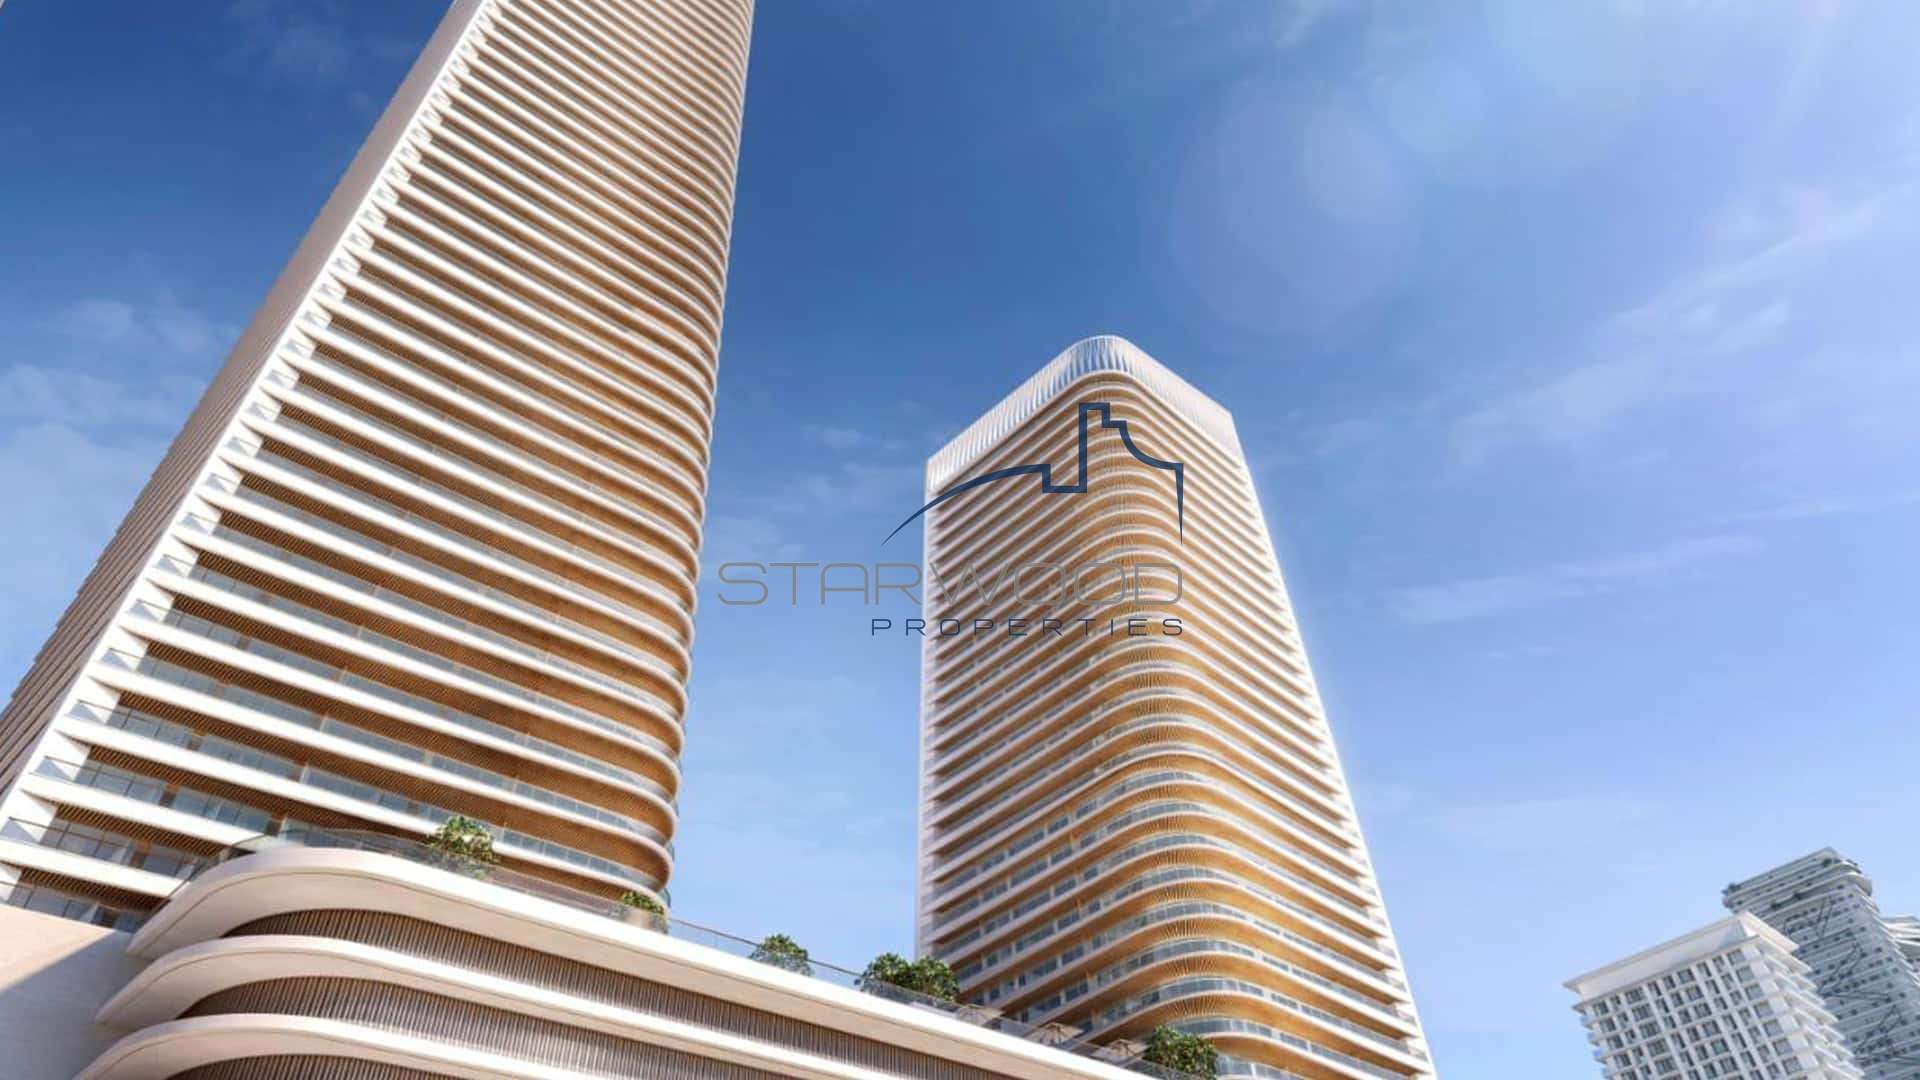 2 BR  Apartment For Sale in Grand Bleu Towers